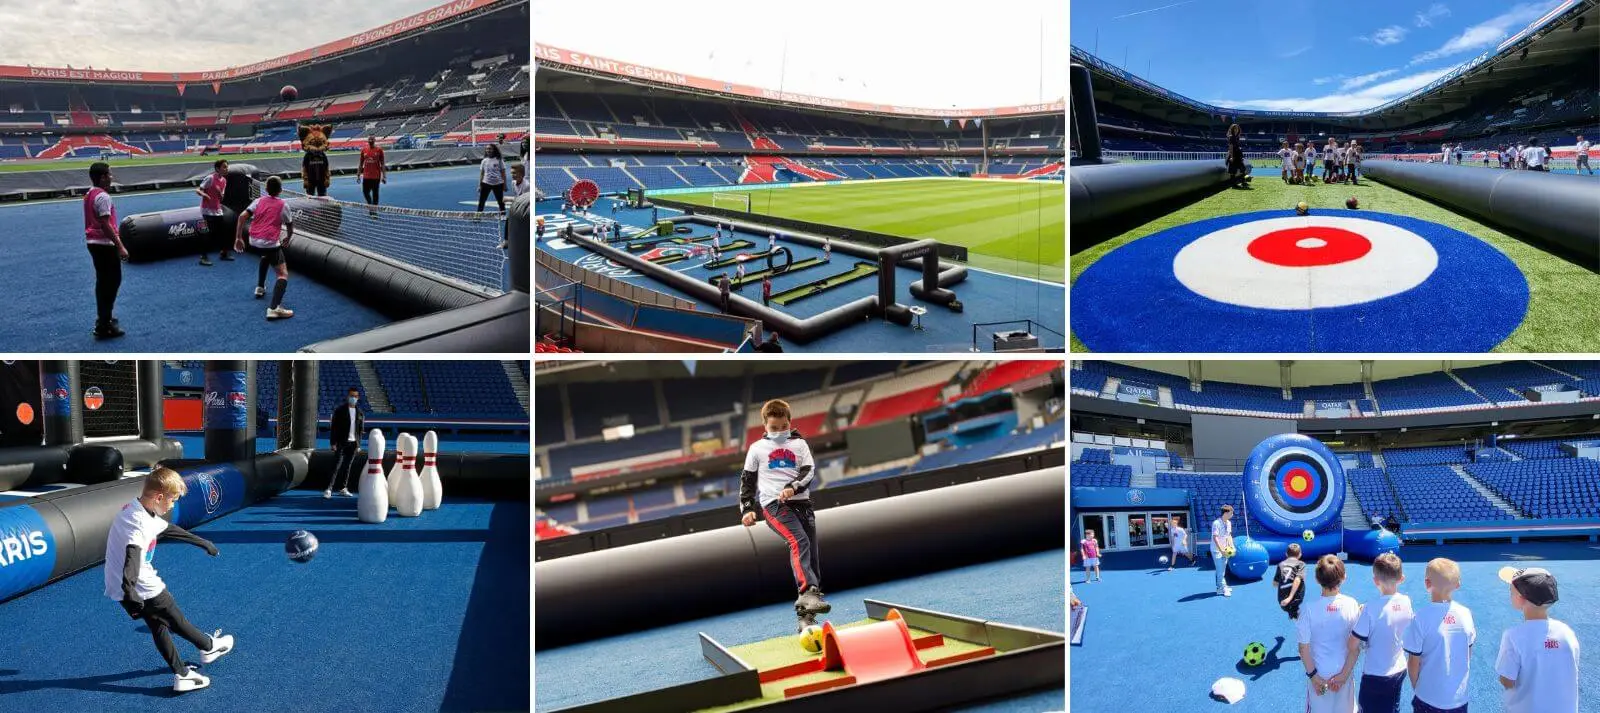 Pictures of Foot Animations in Parc des Princes